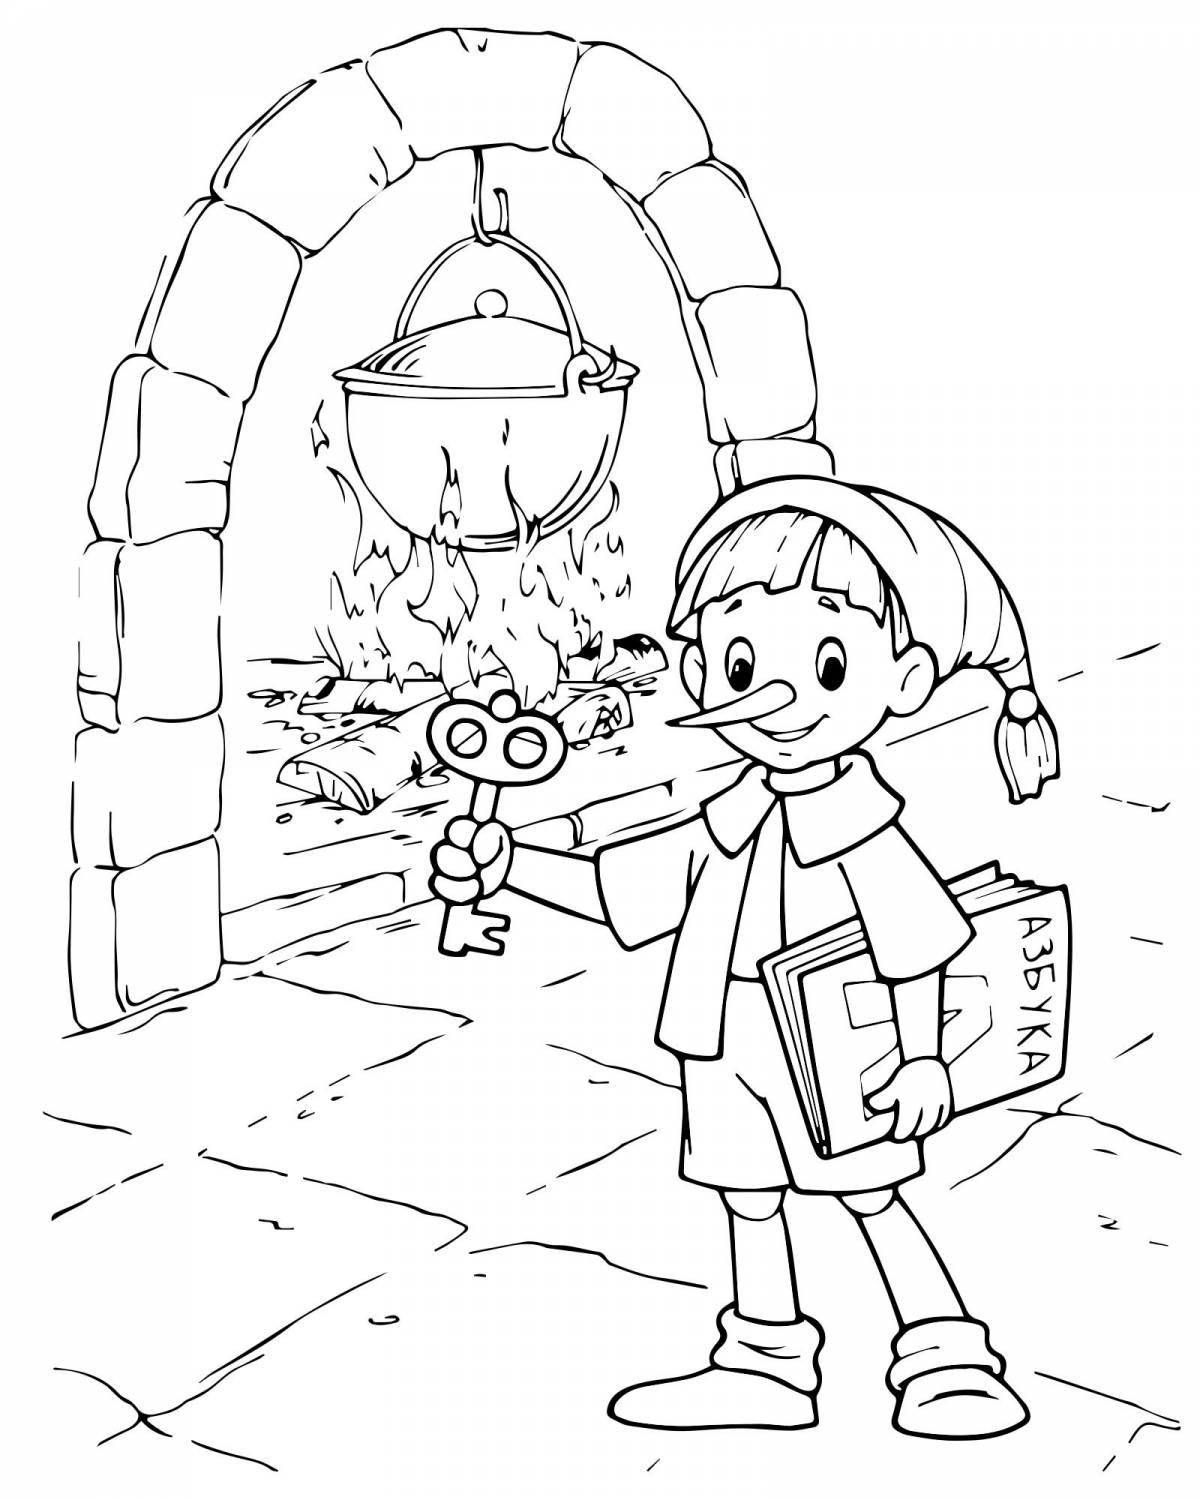 Great golden key coloring book for kids